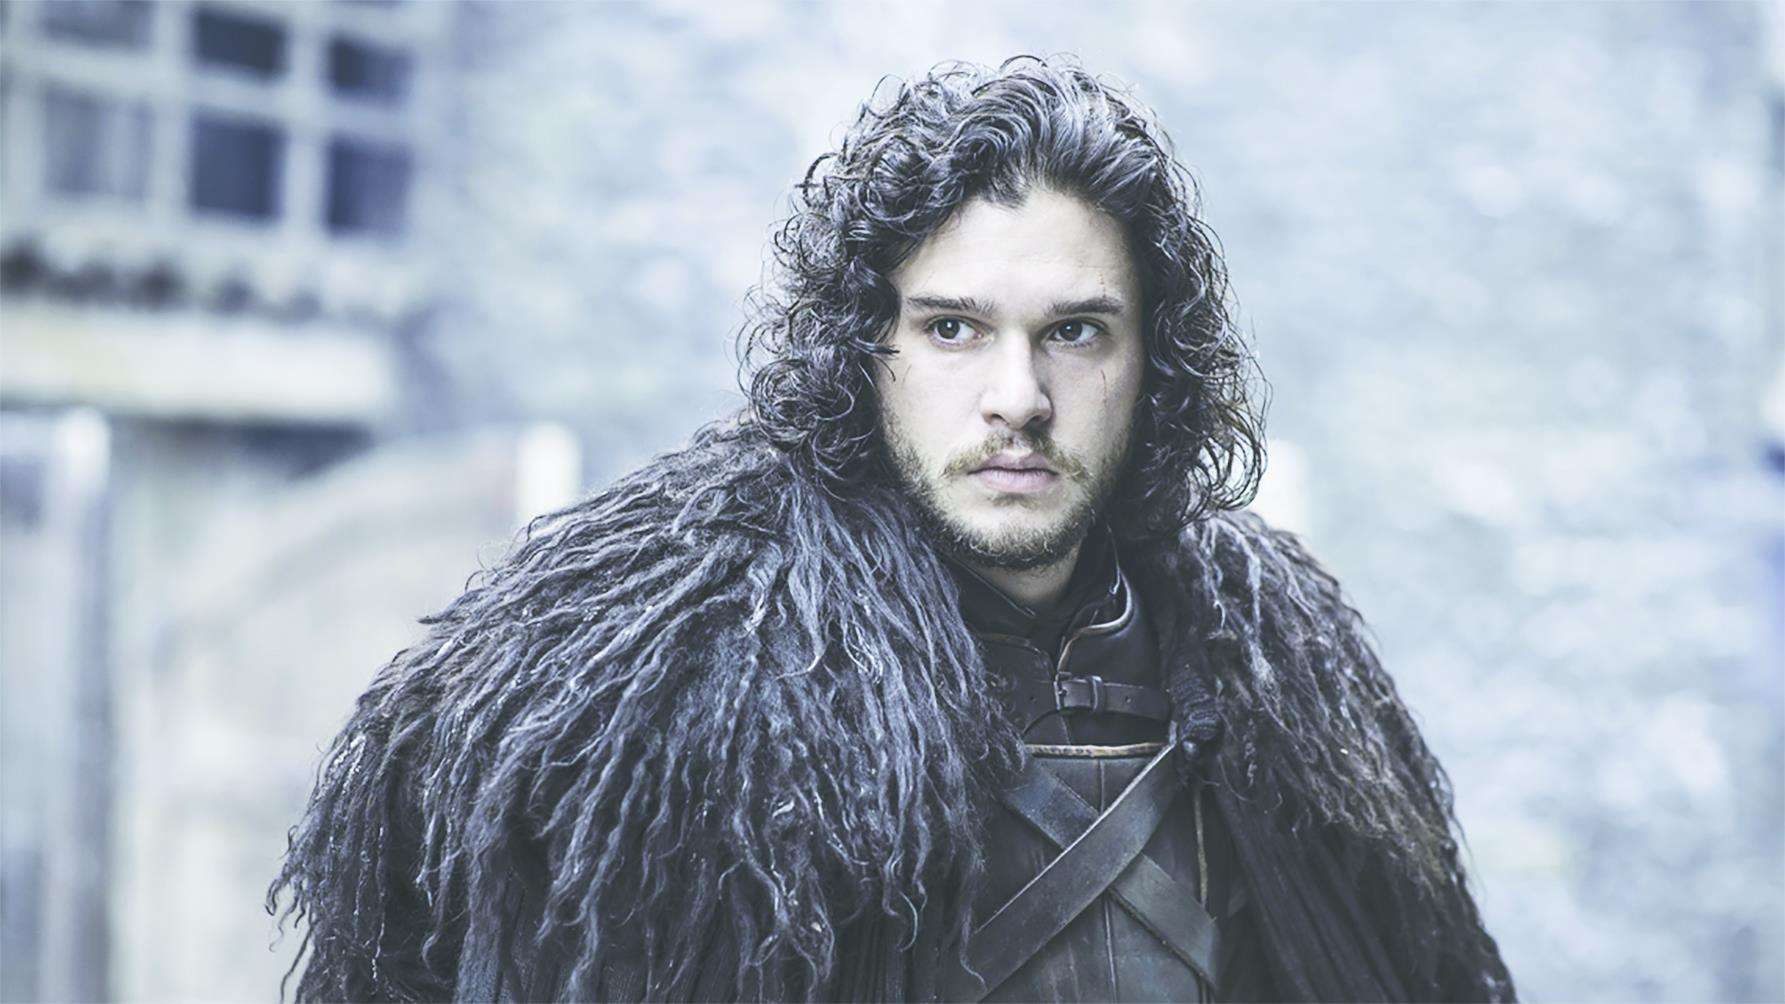 Jon Snow, played by Kit Harington in Game of Thrones